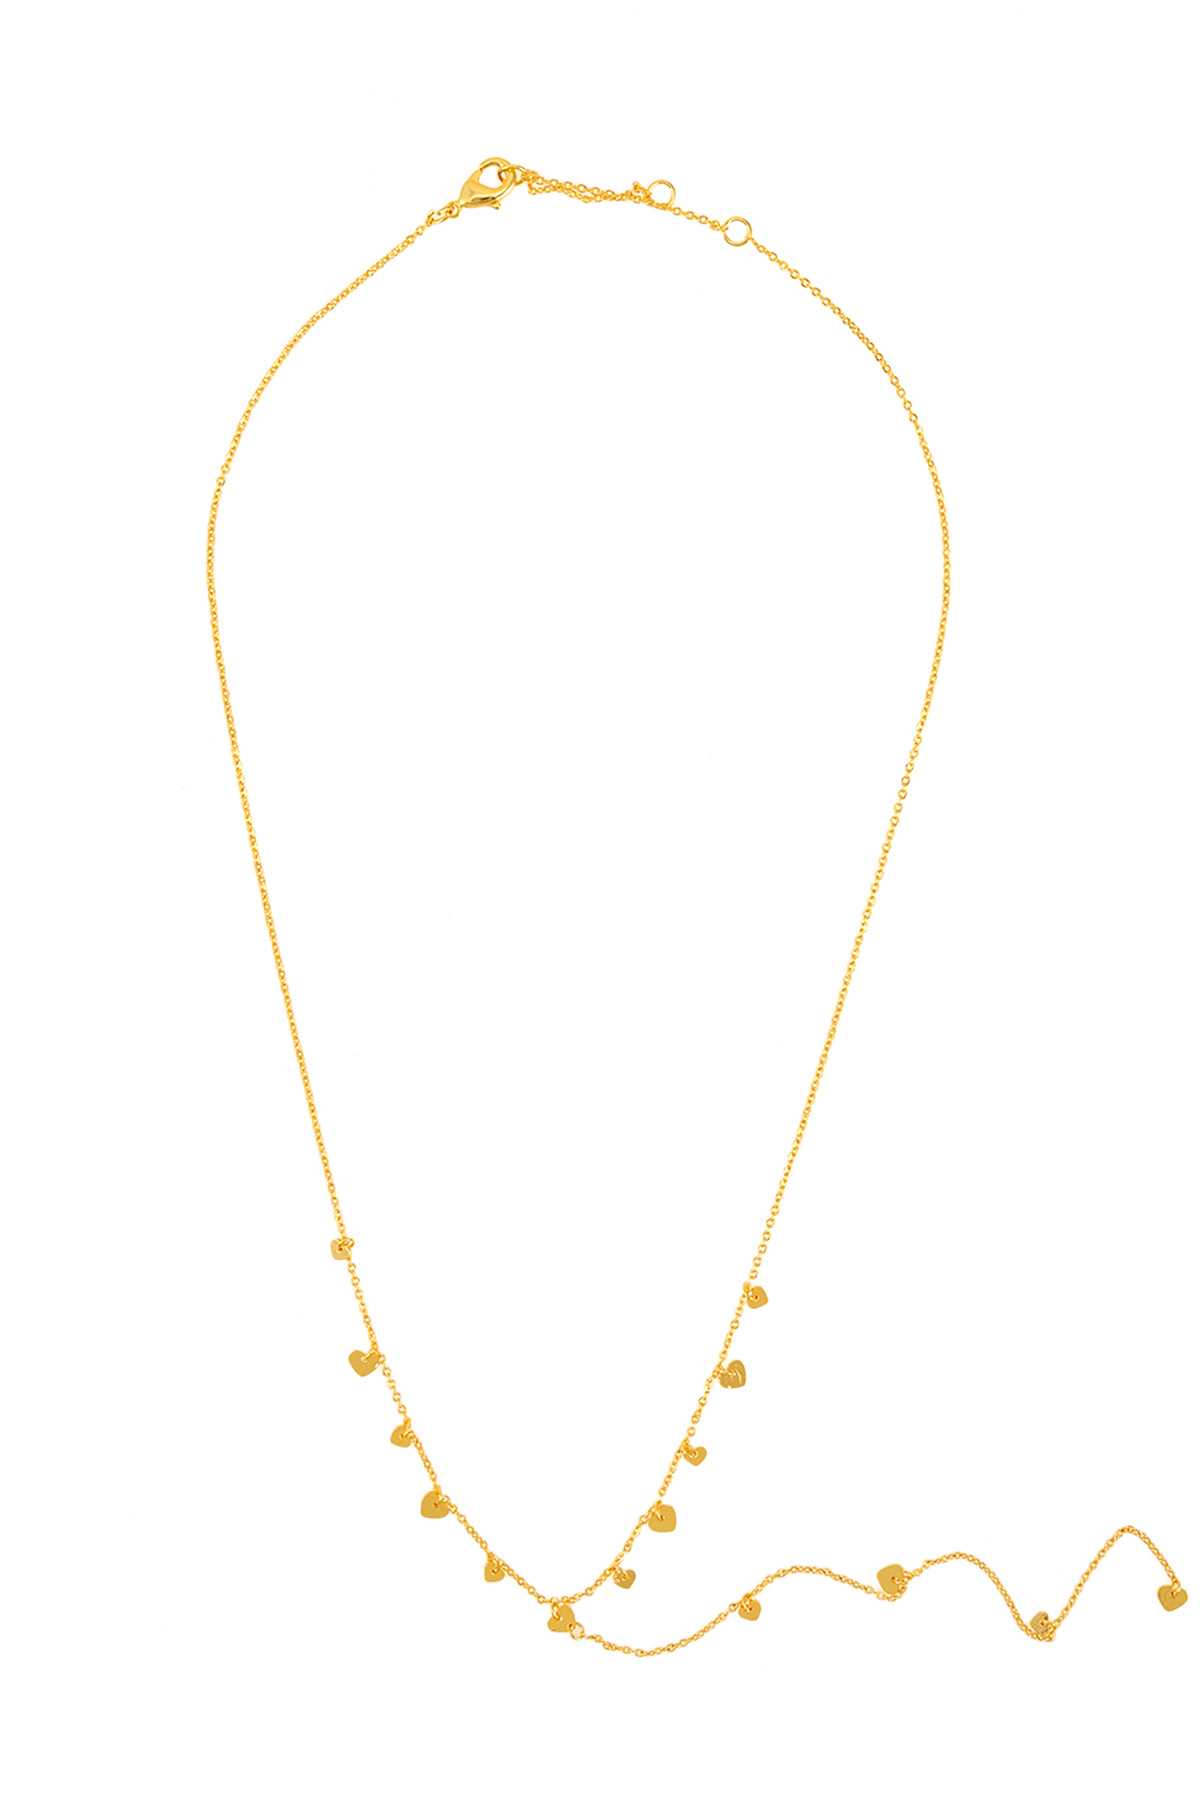 GOLD DIPPED SMALL HEART CHARM LARIAT NECKLACE